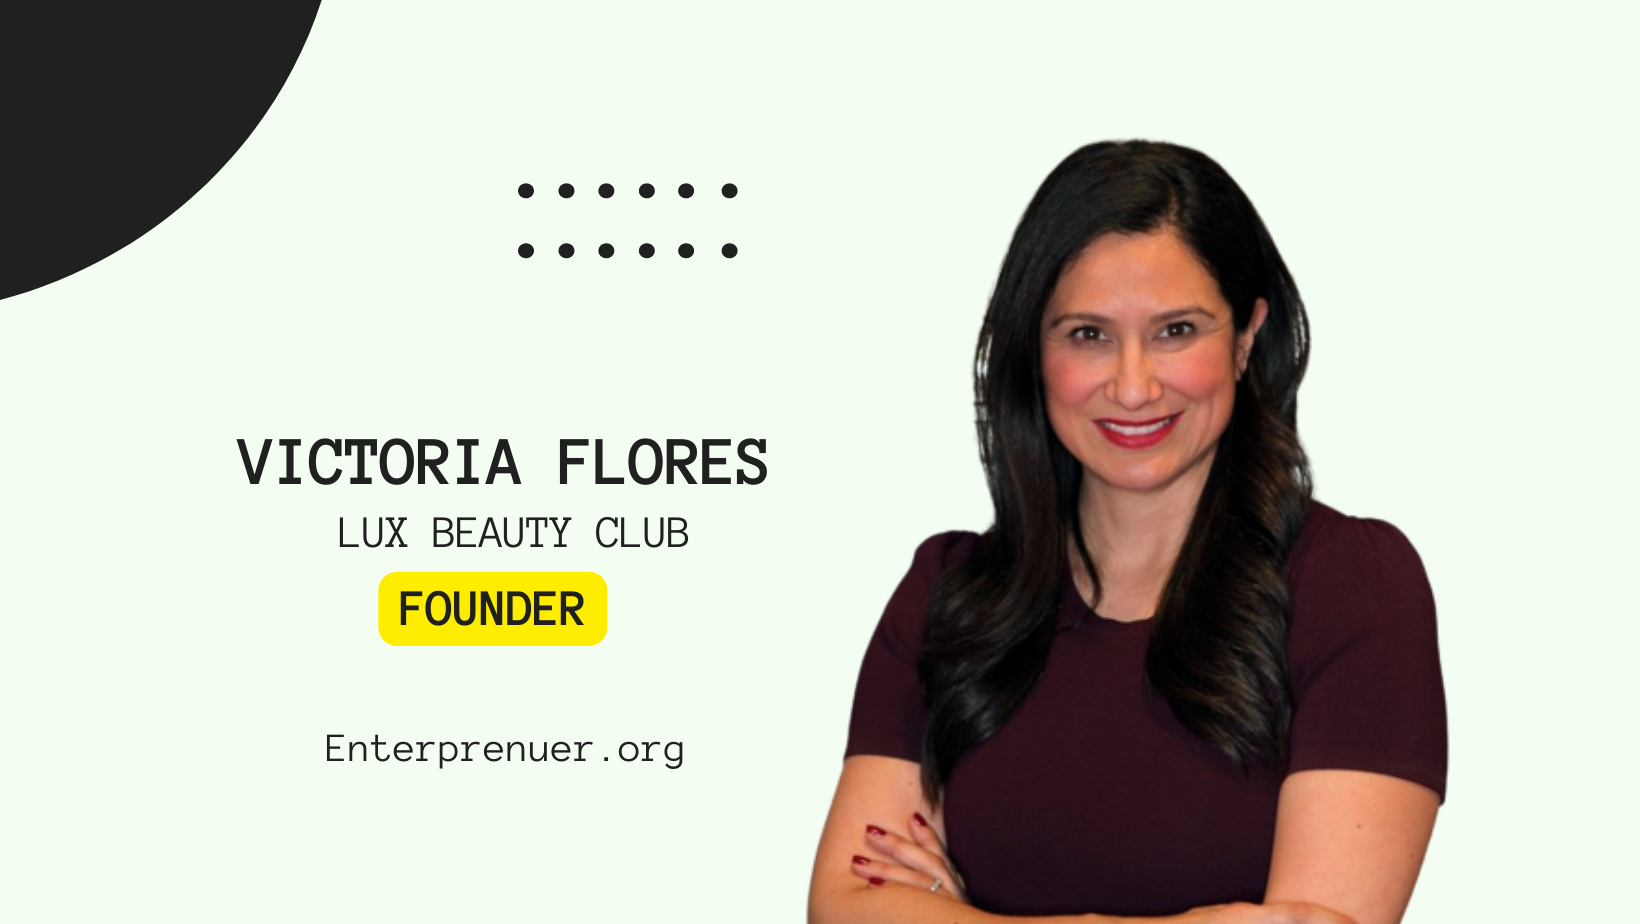 Victoria Flores, Founder of Lux Beauty Club